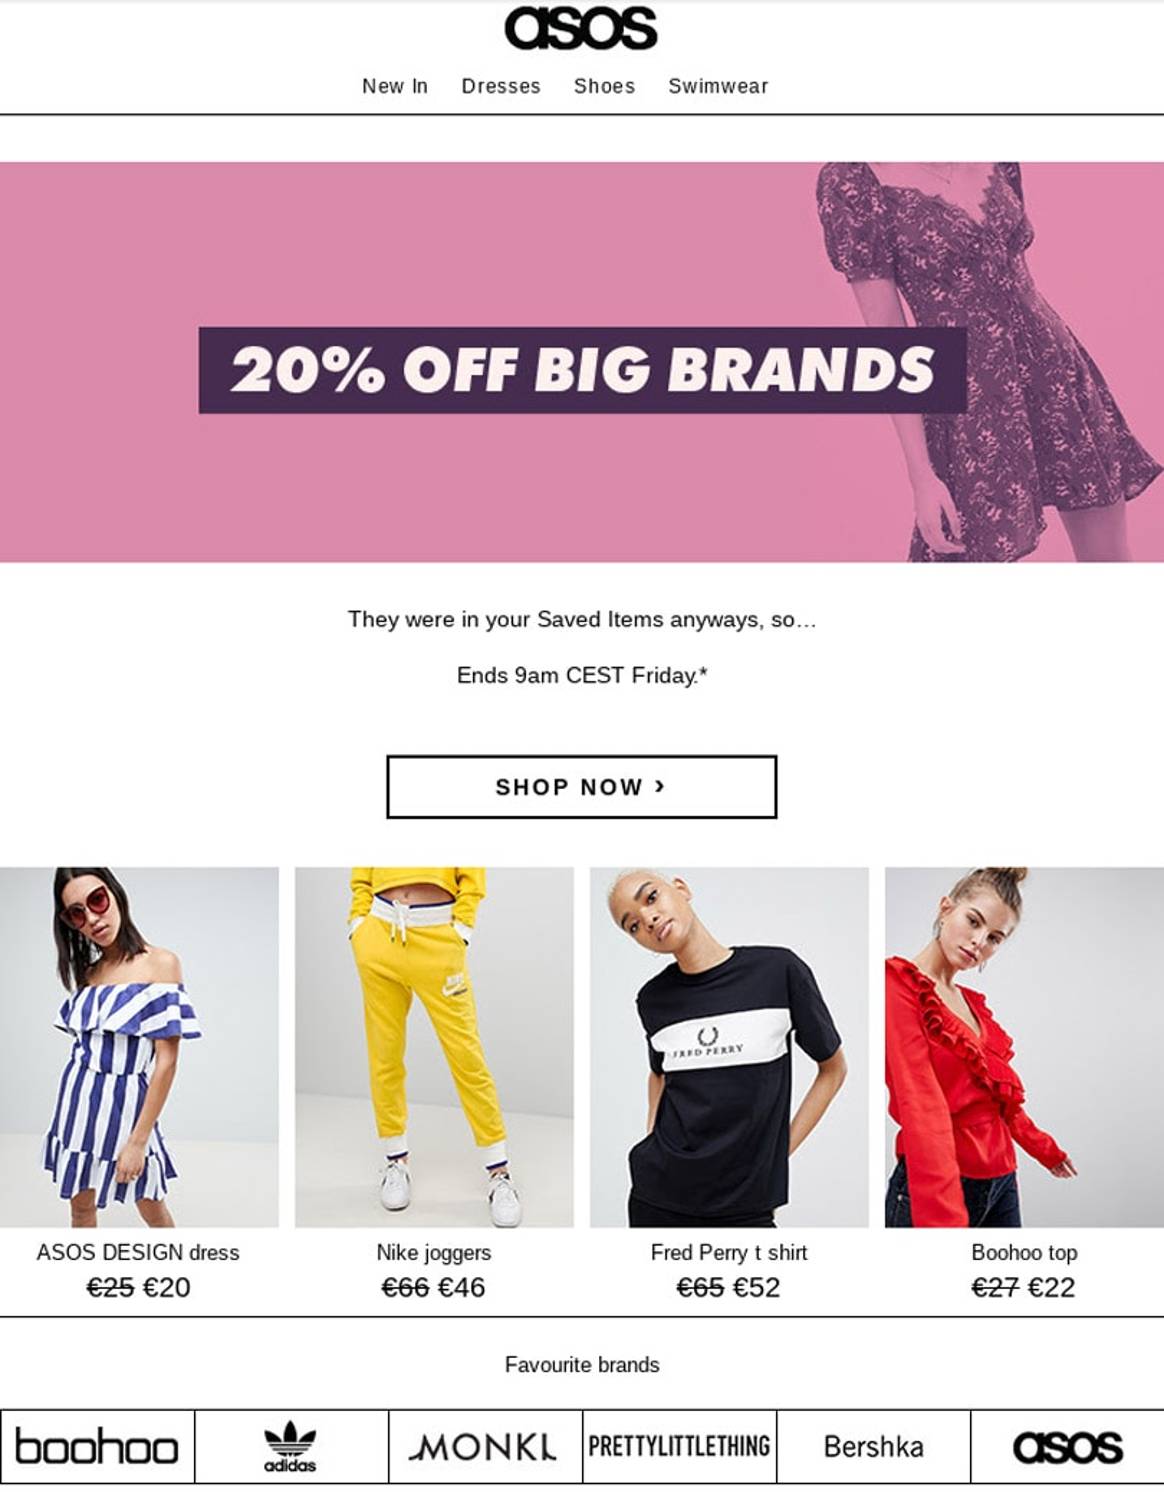 GDPR: Leading challenges online fashion retailers may face